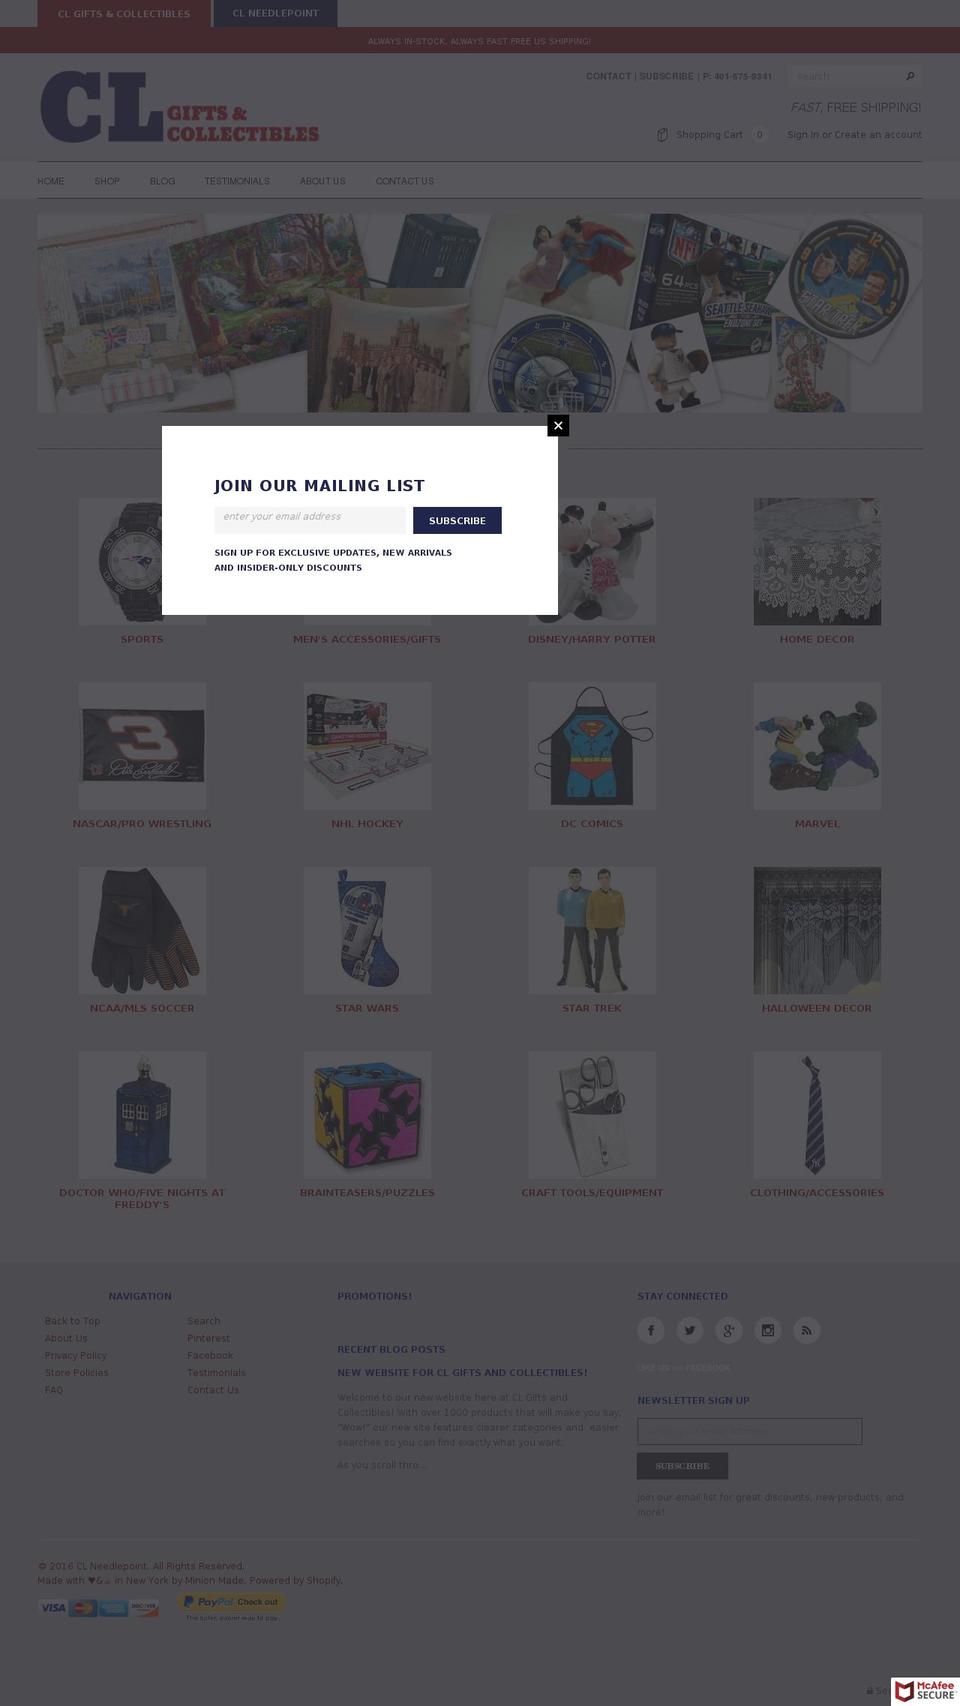 Minion Shopify theme site example clgiftsandcollectibles.com